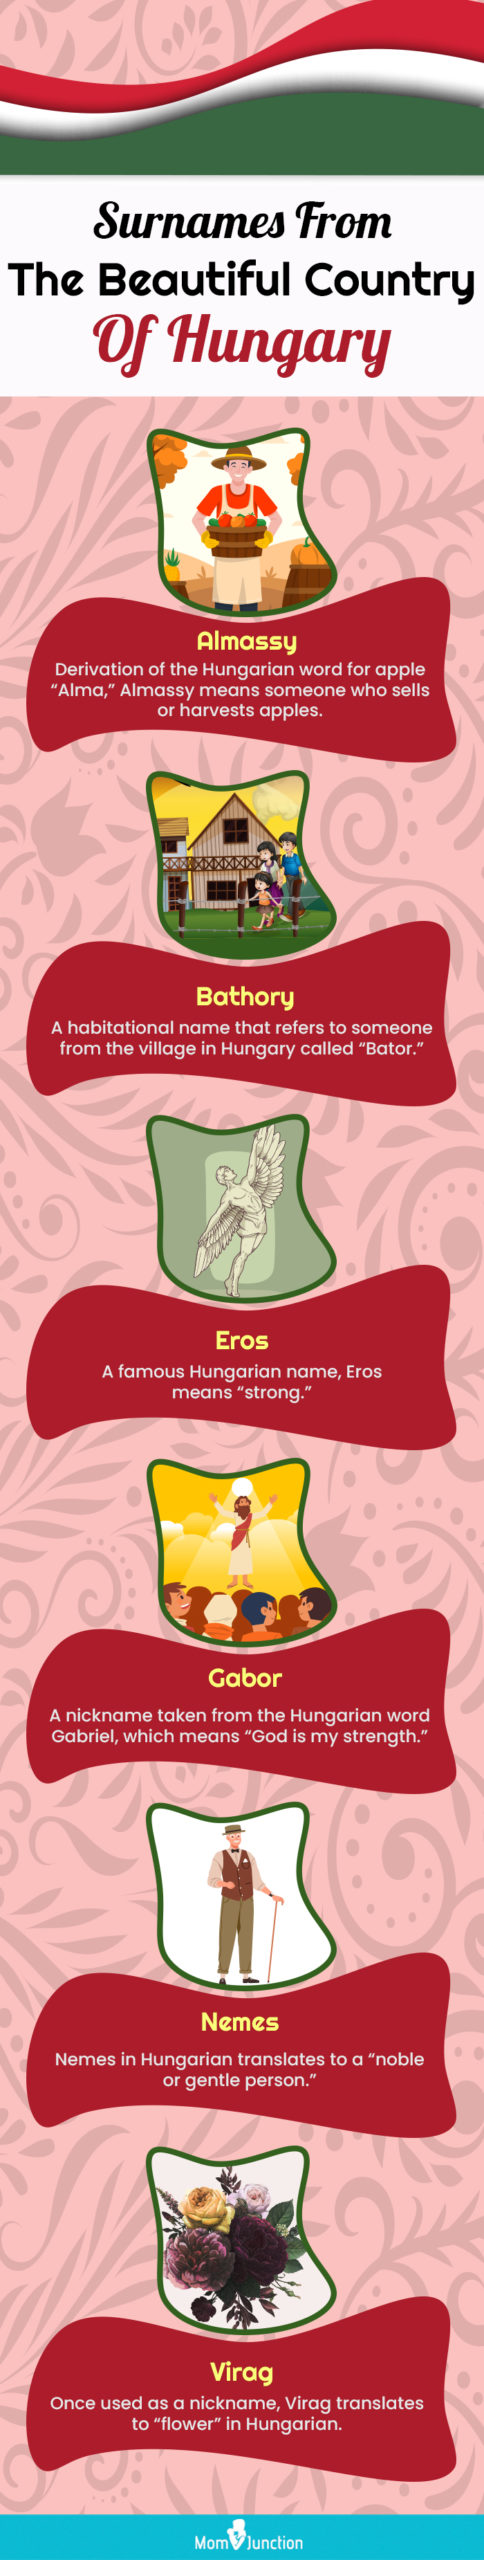 surnames from the beautiful country of hungary (infographic)